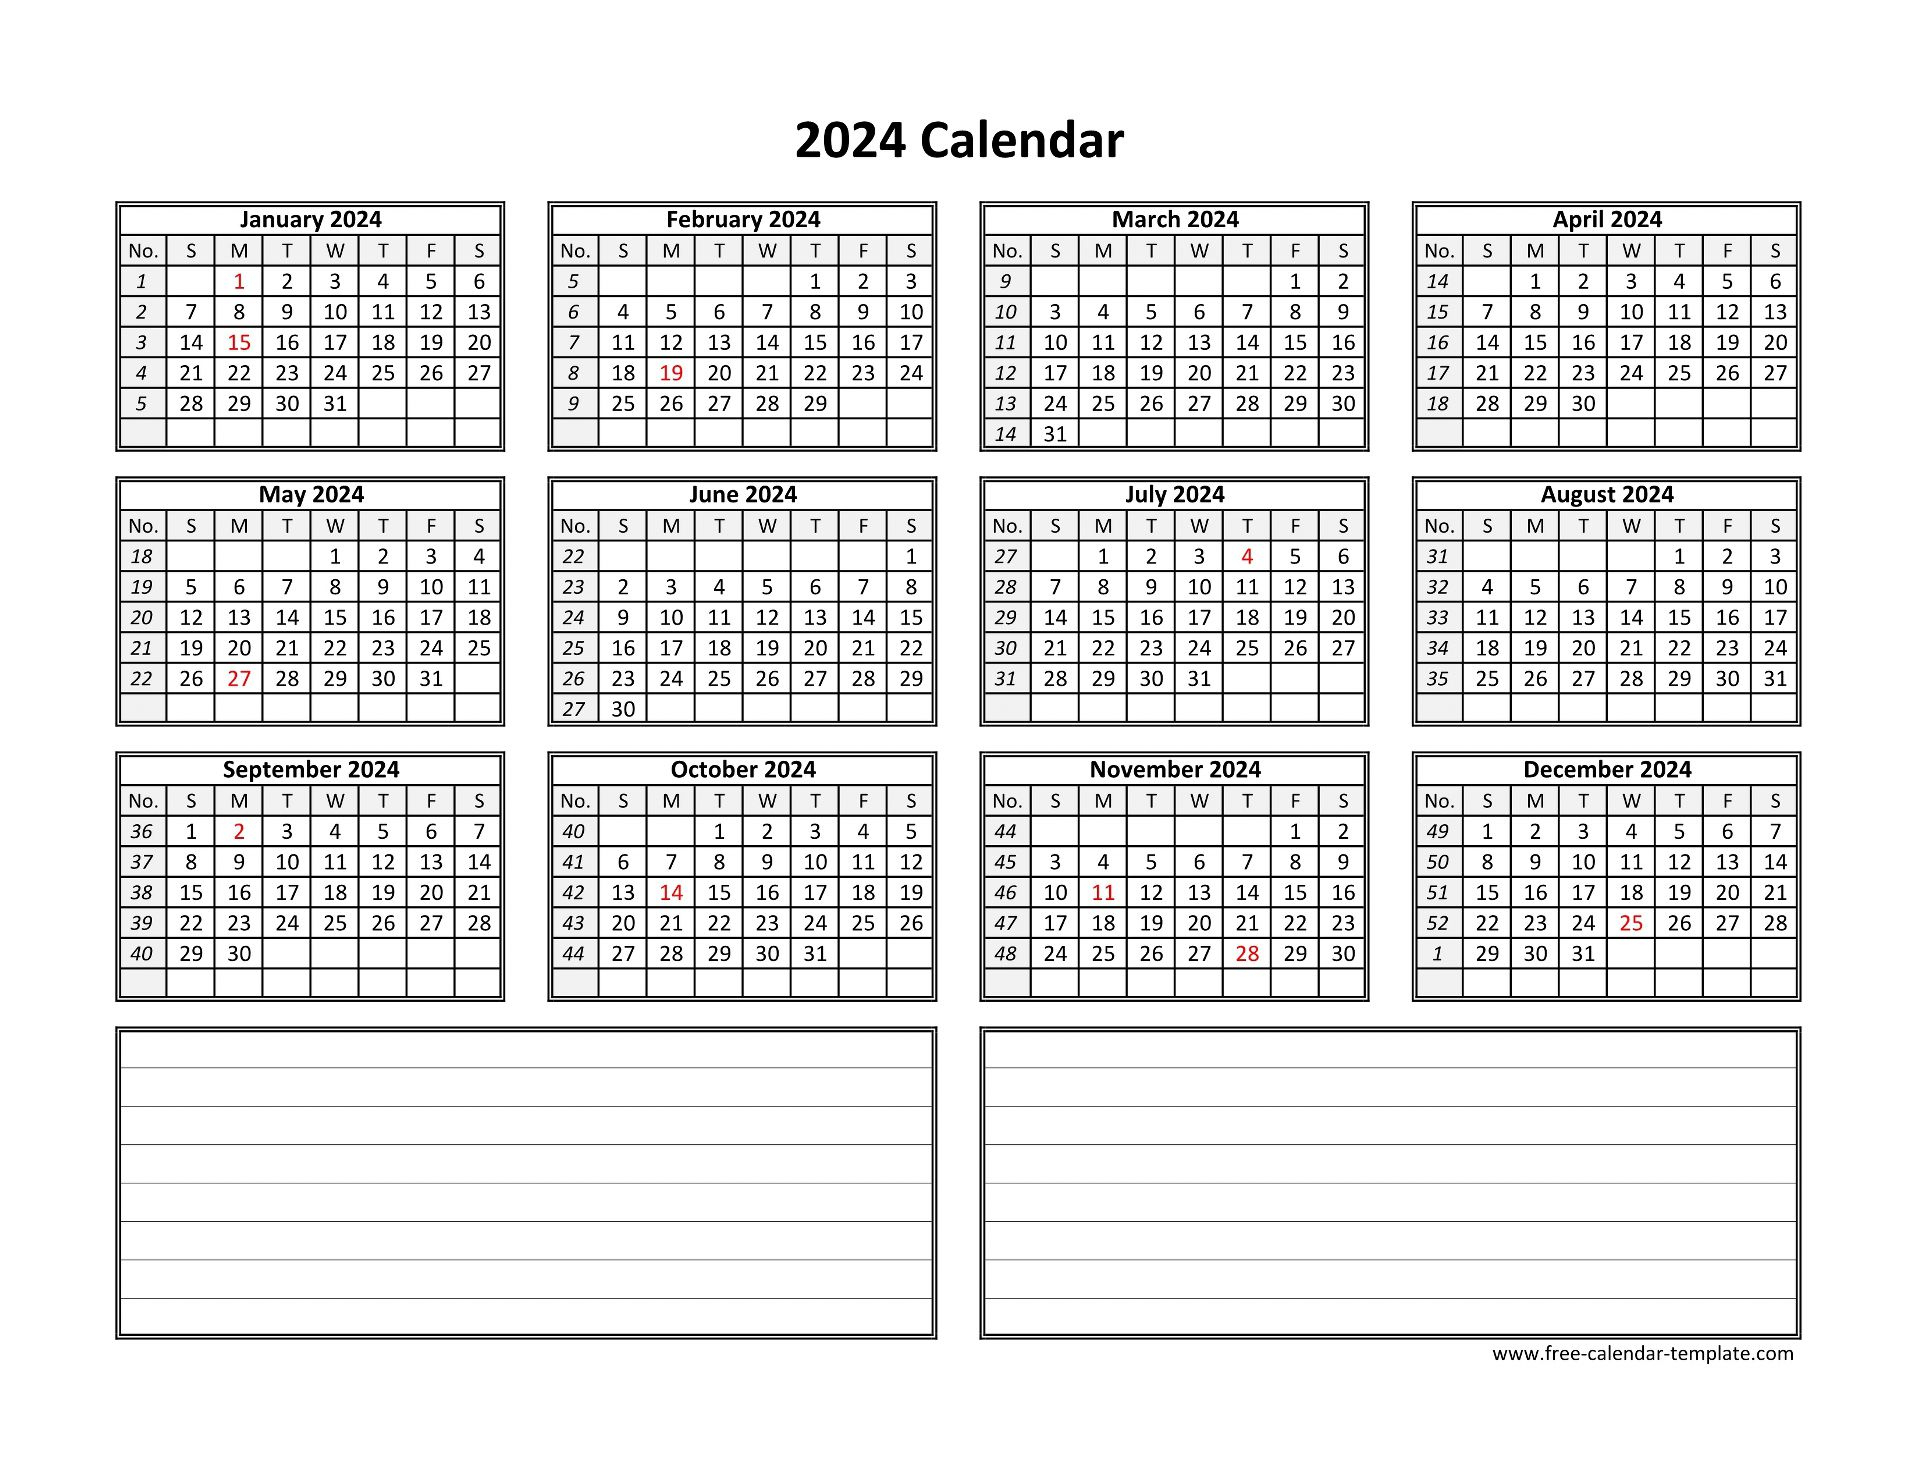 Yearly 2024 Calendar Printable With Space For Notes | Free | Printable Calendar 2024 With Notes